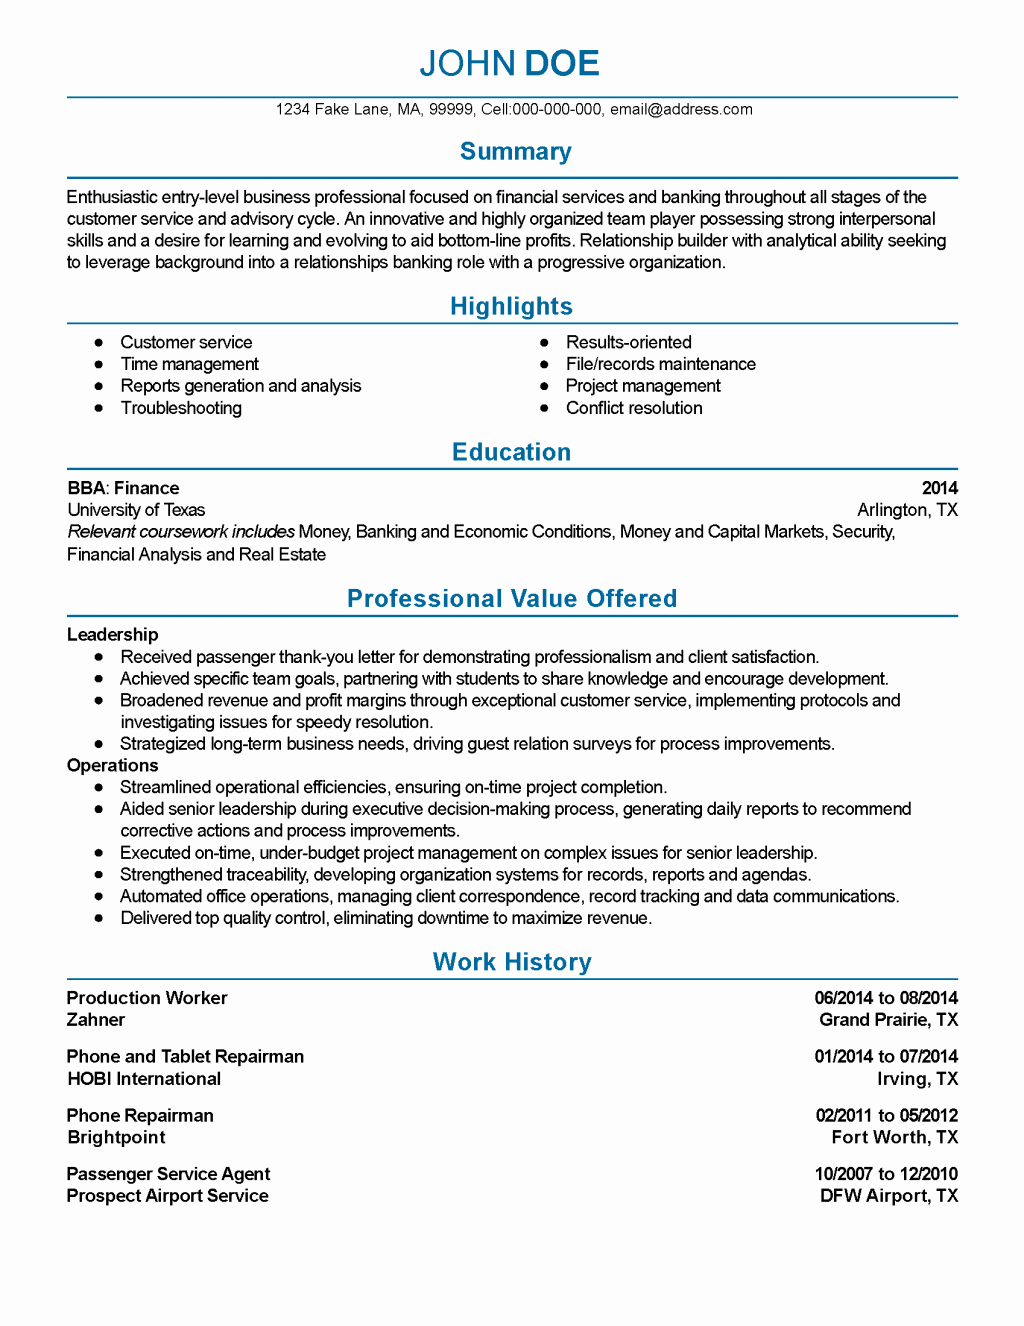 Letter to Investors Template - Bank Teller Objective Resume Beautiful Sample Investment Banking